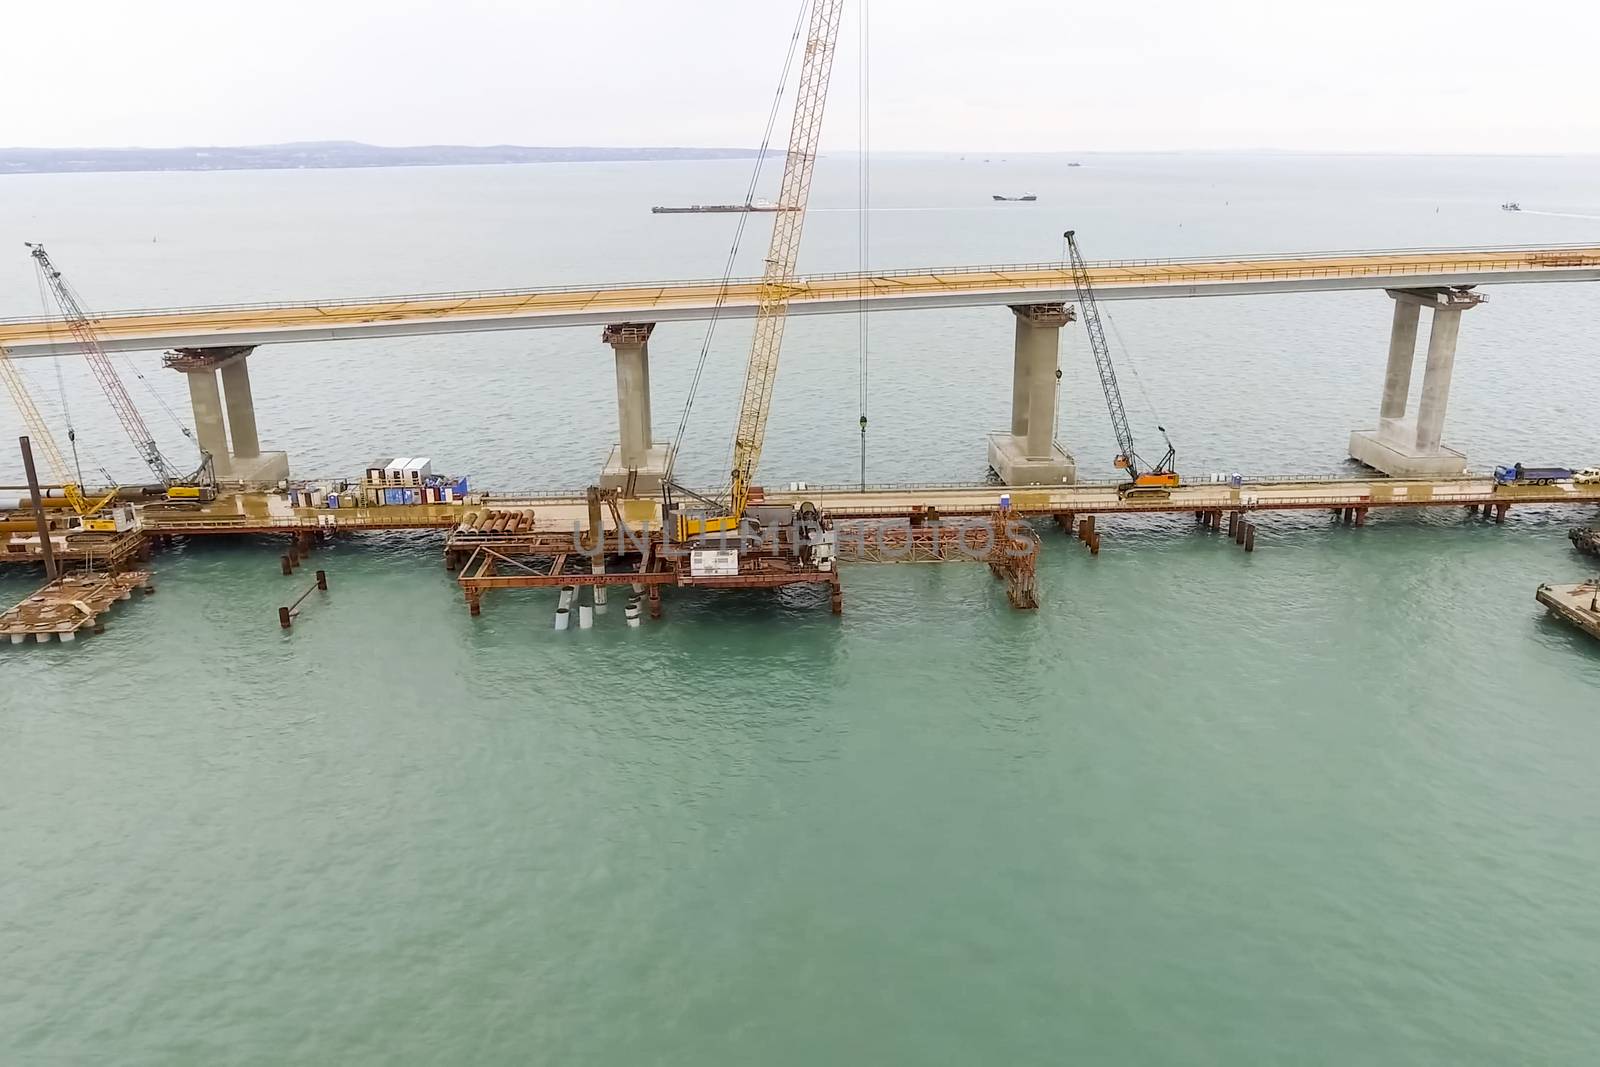 Construction of the bridge. Engineering facilities for the construction of a railway and automobile bridge across the strait.